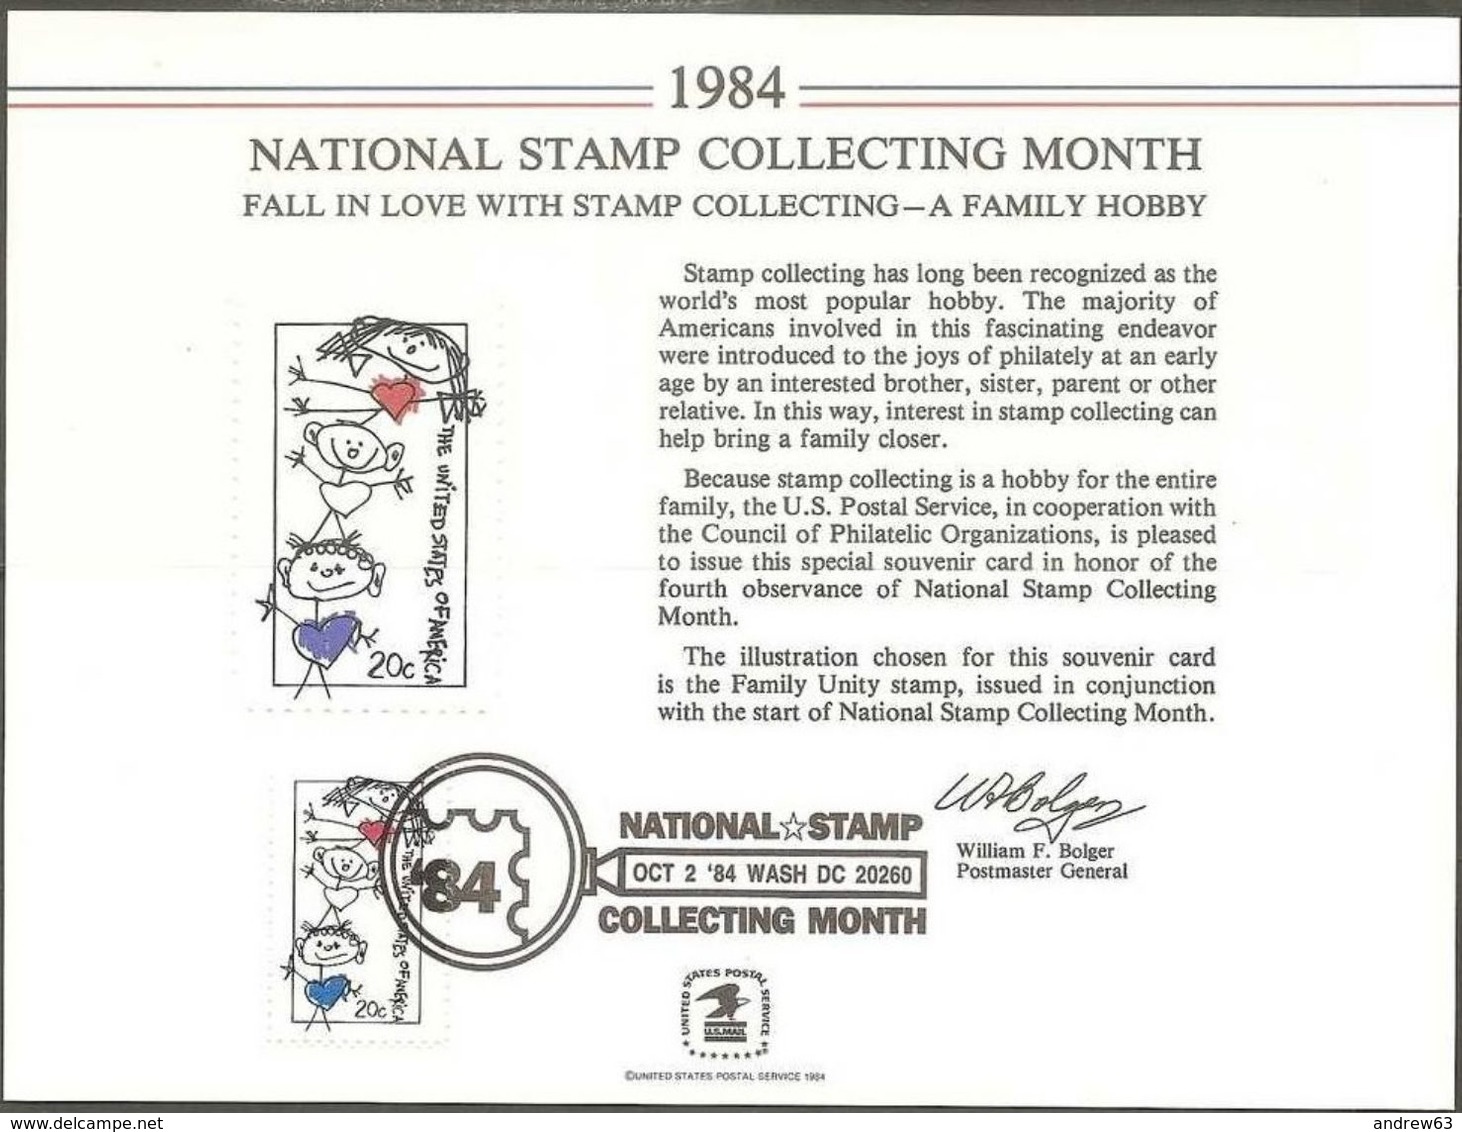 STATI UNITI - USA - 1984 - Cancelled Mint Souvenir Card - US National Stamp Collecting Month - Souvenirs & Special Cards